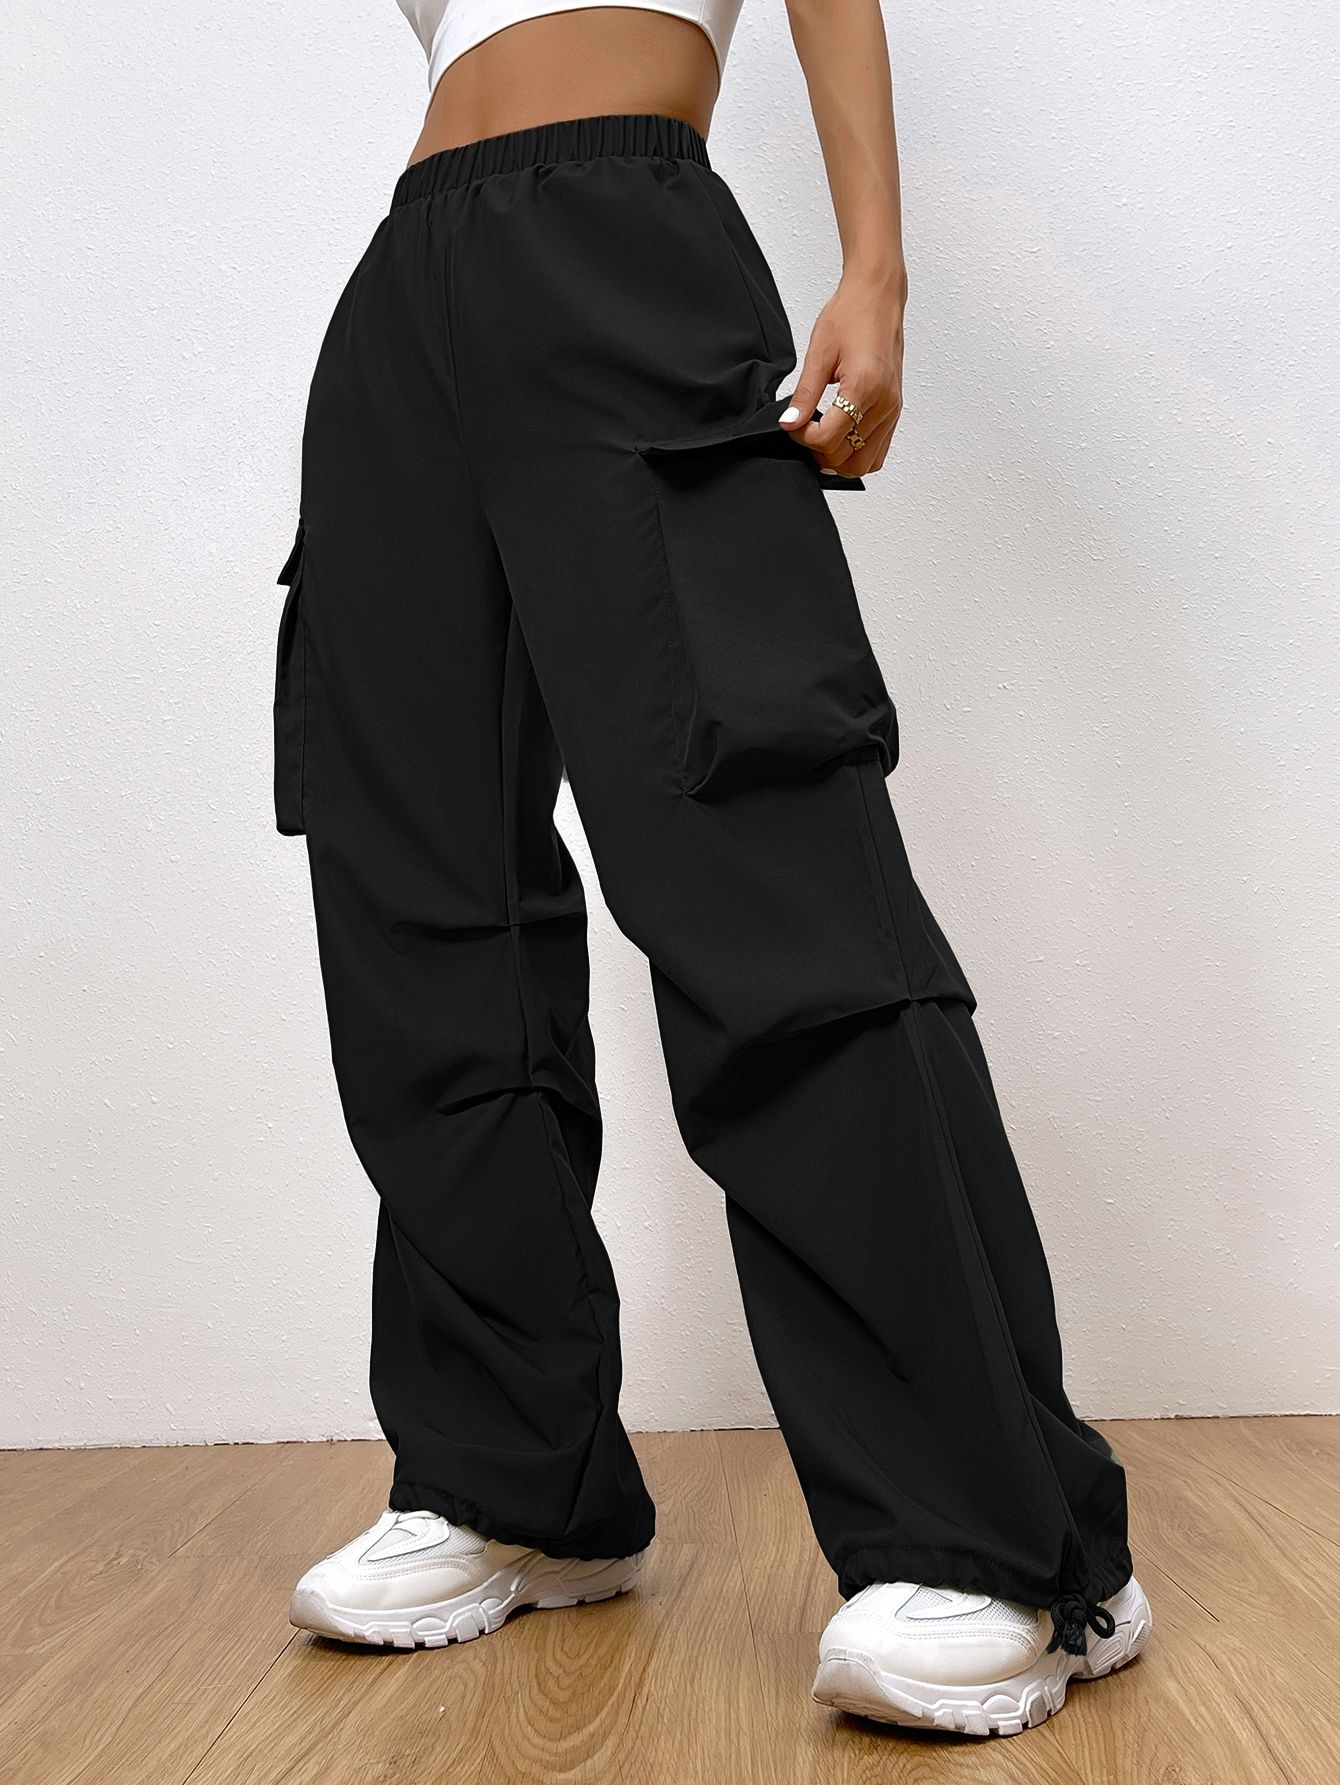 Make a Style statement with Cargo pants
for women !